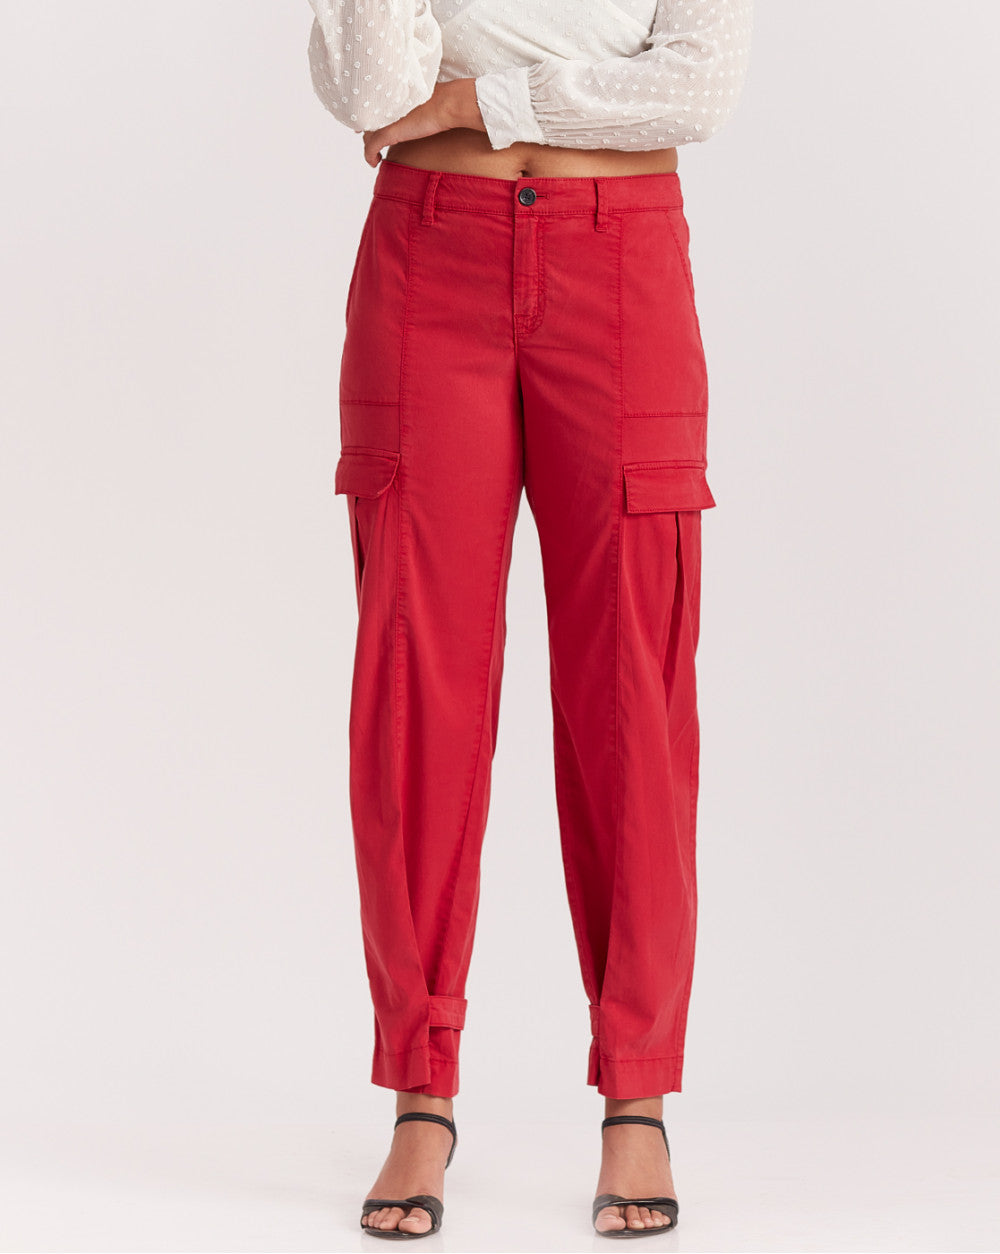 Straight Fit Garment Dyed Utility Pants - Robin Red